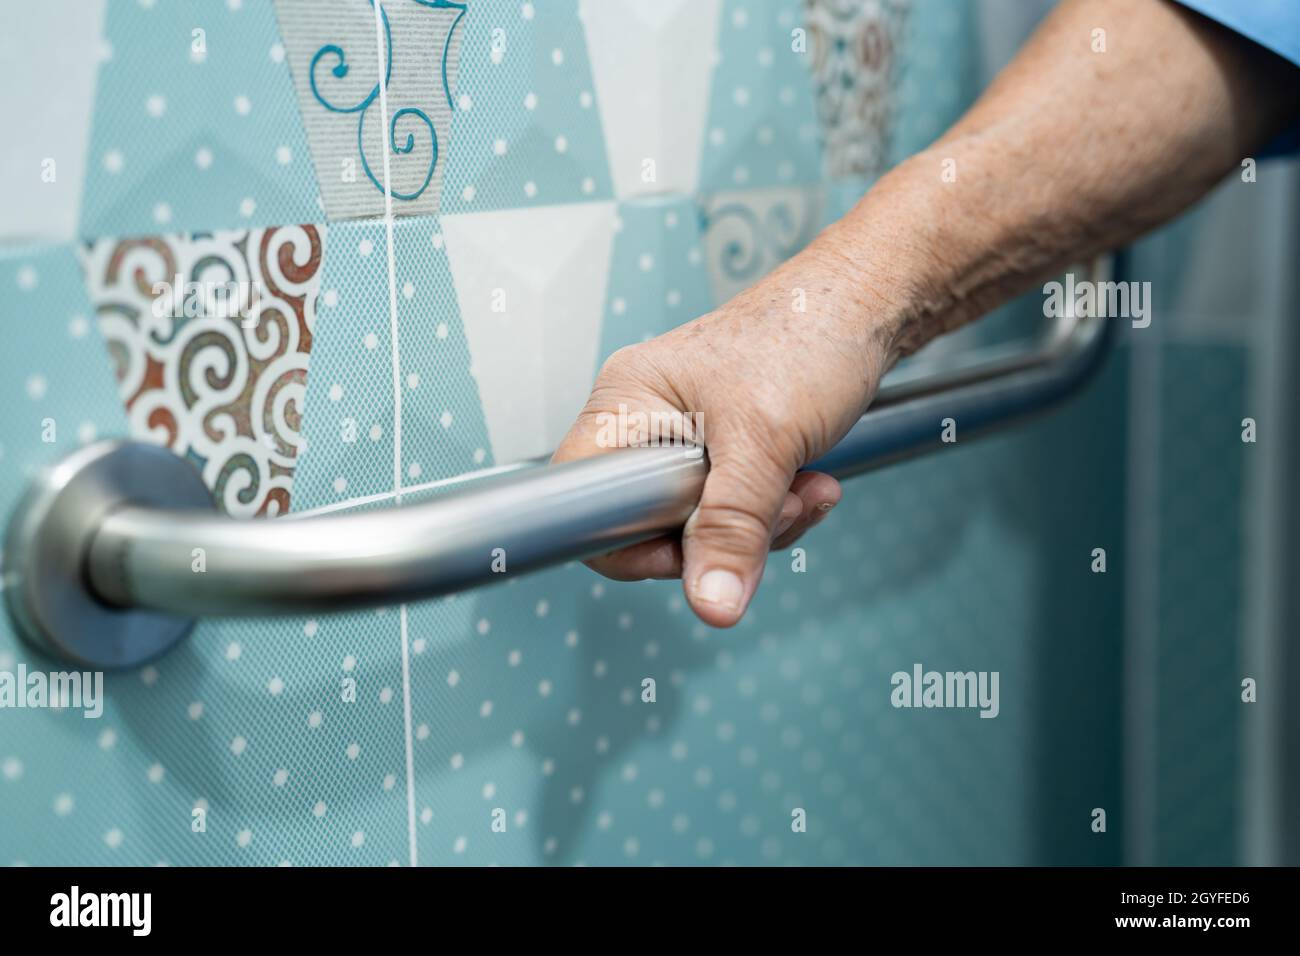 Asian senior or elderly old lady woman patient use toilet bathroom handle security in nursing hospital ward, healthy strong medical concept. Stock Photo